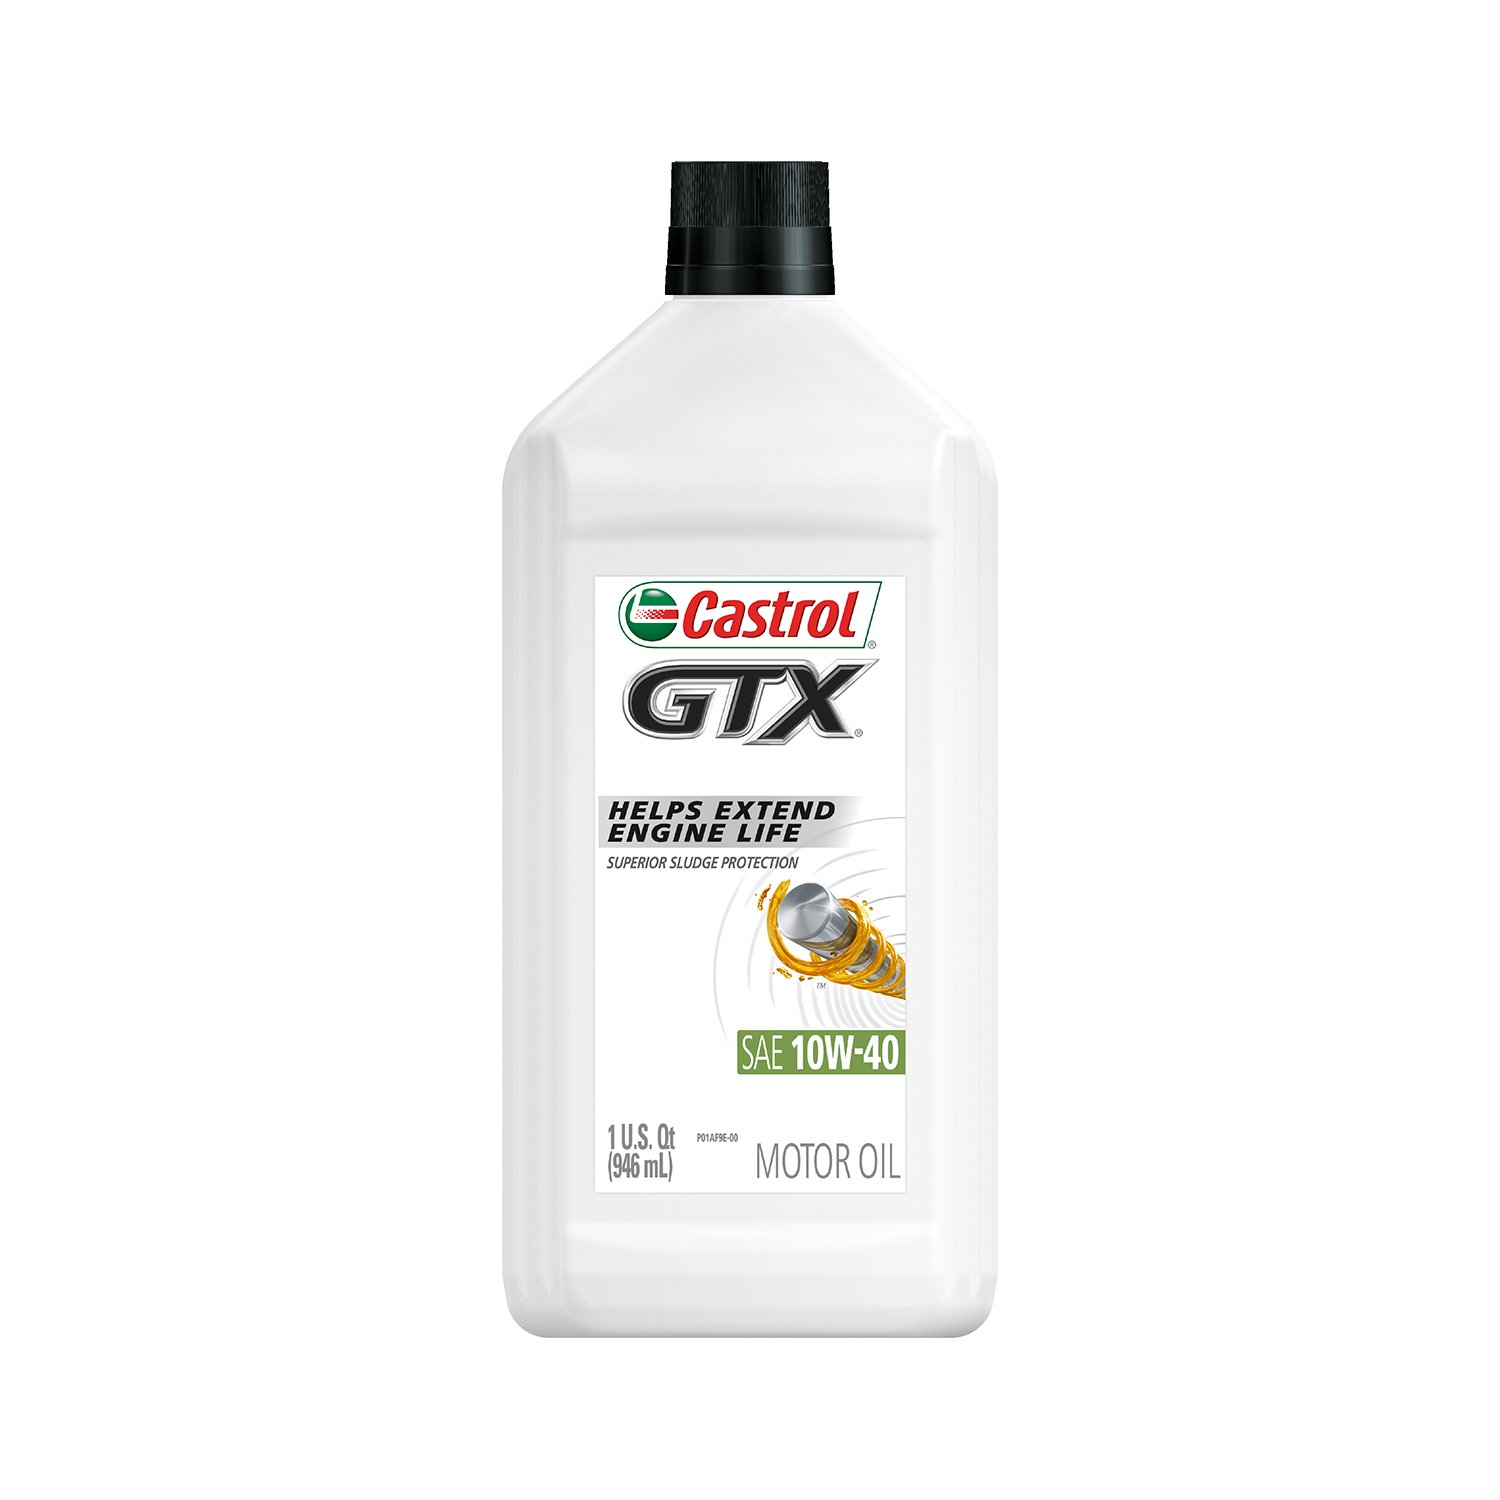 What Is Castrol Gtx